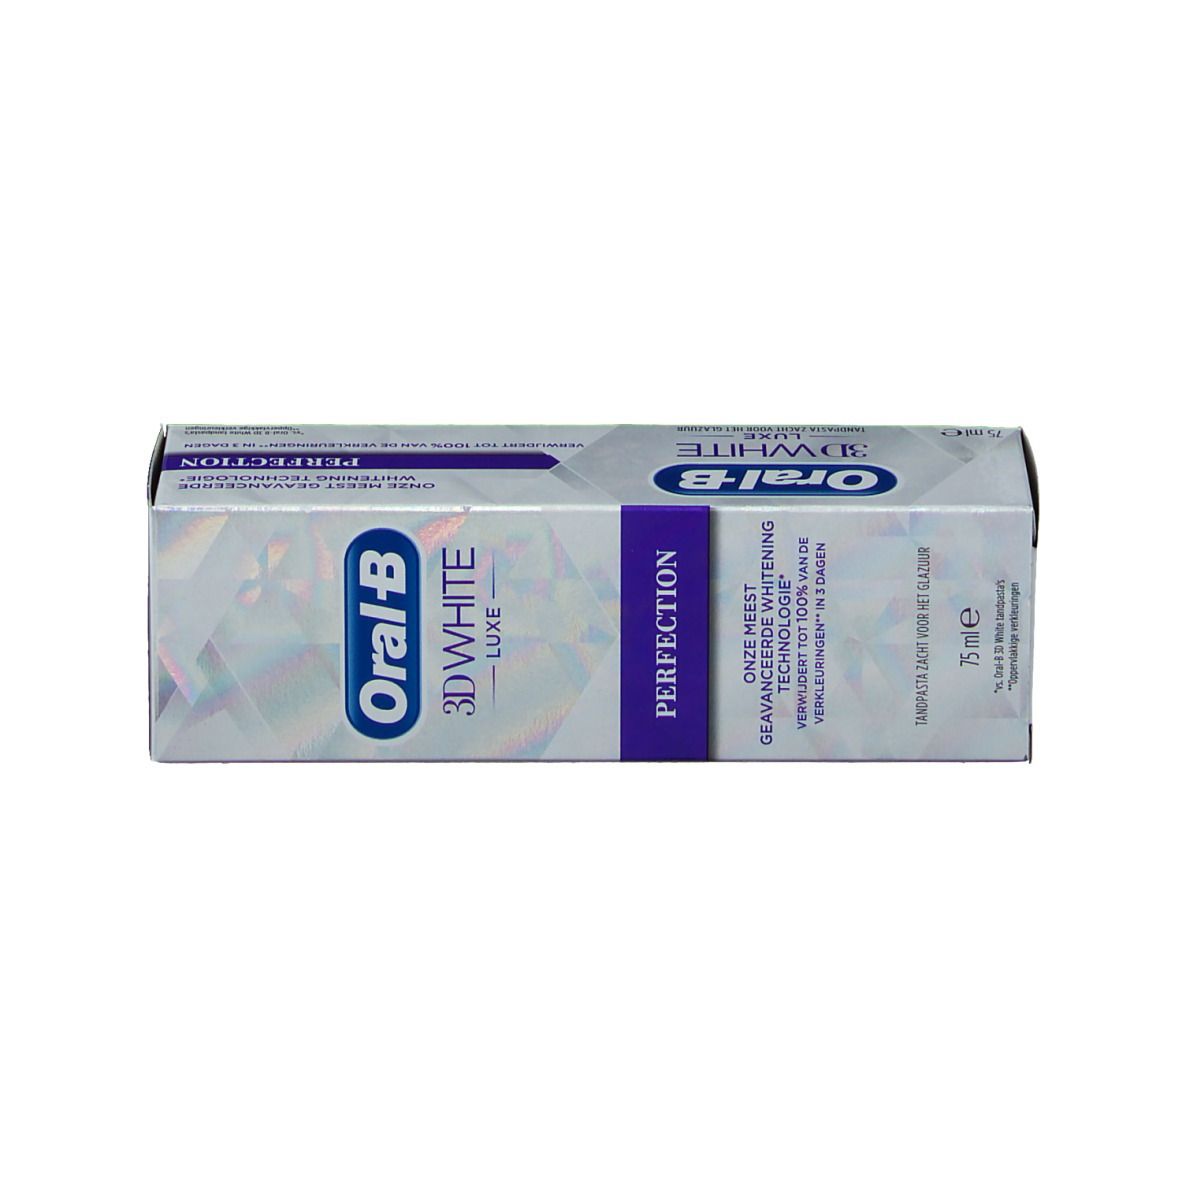 Oral-B 3D White Luxe Perfection Dentifrice